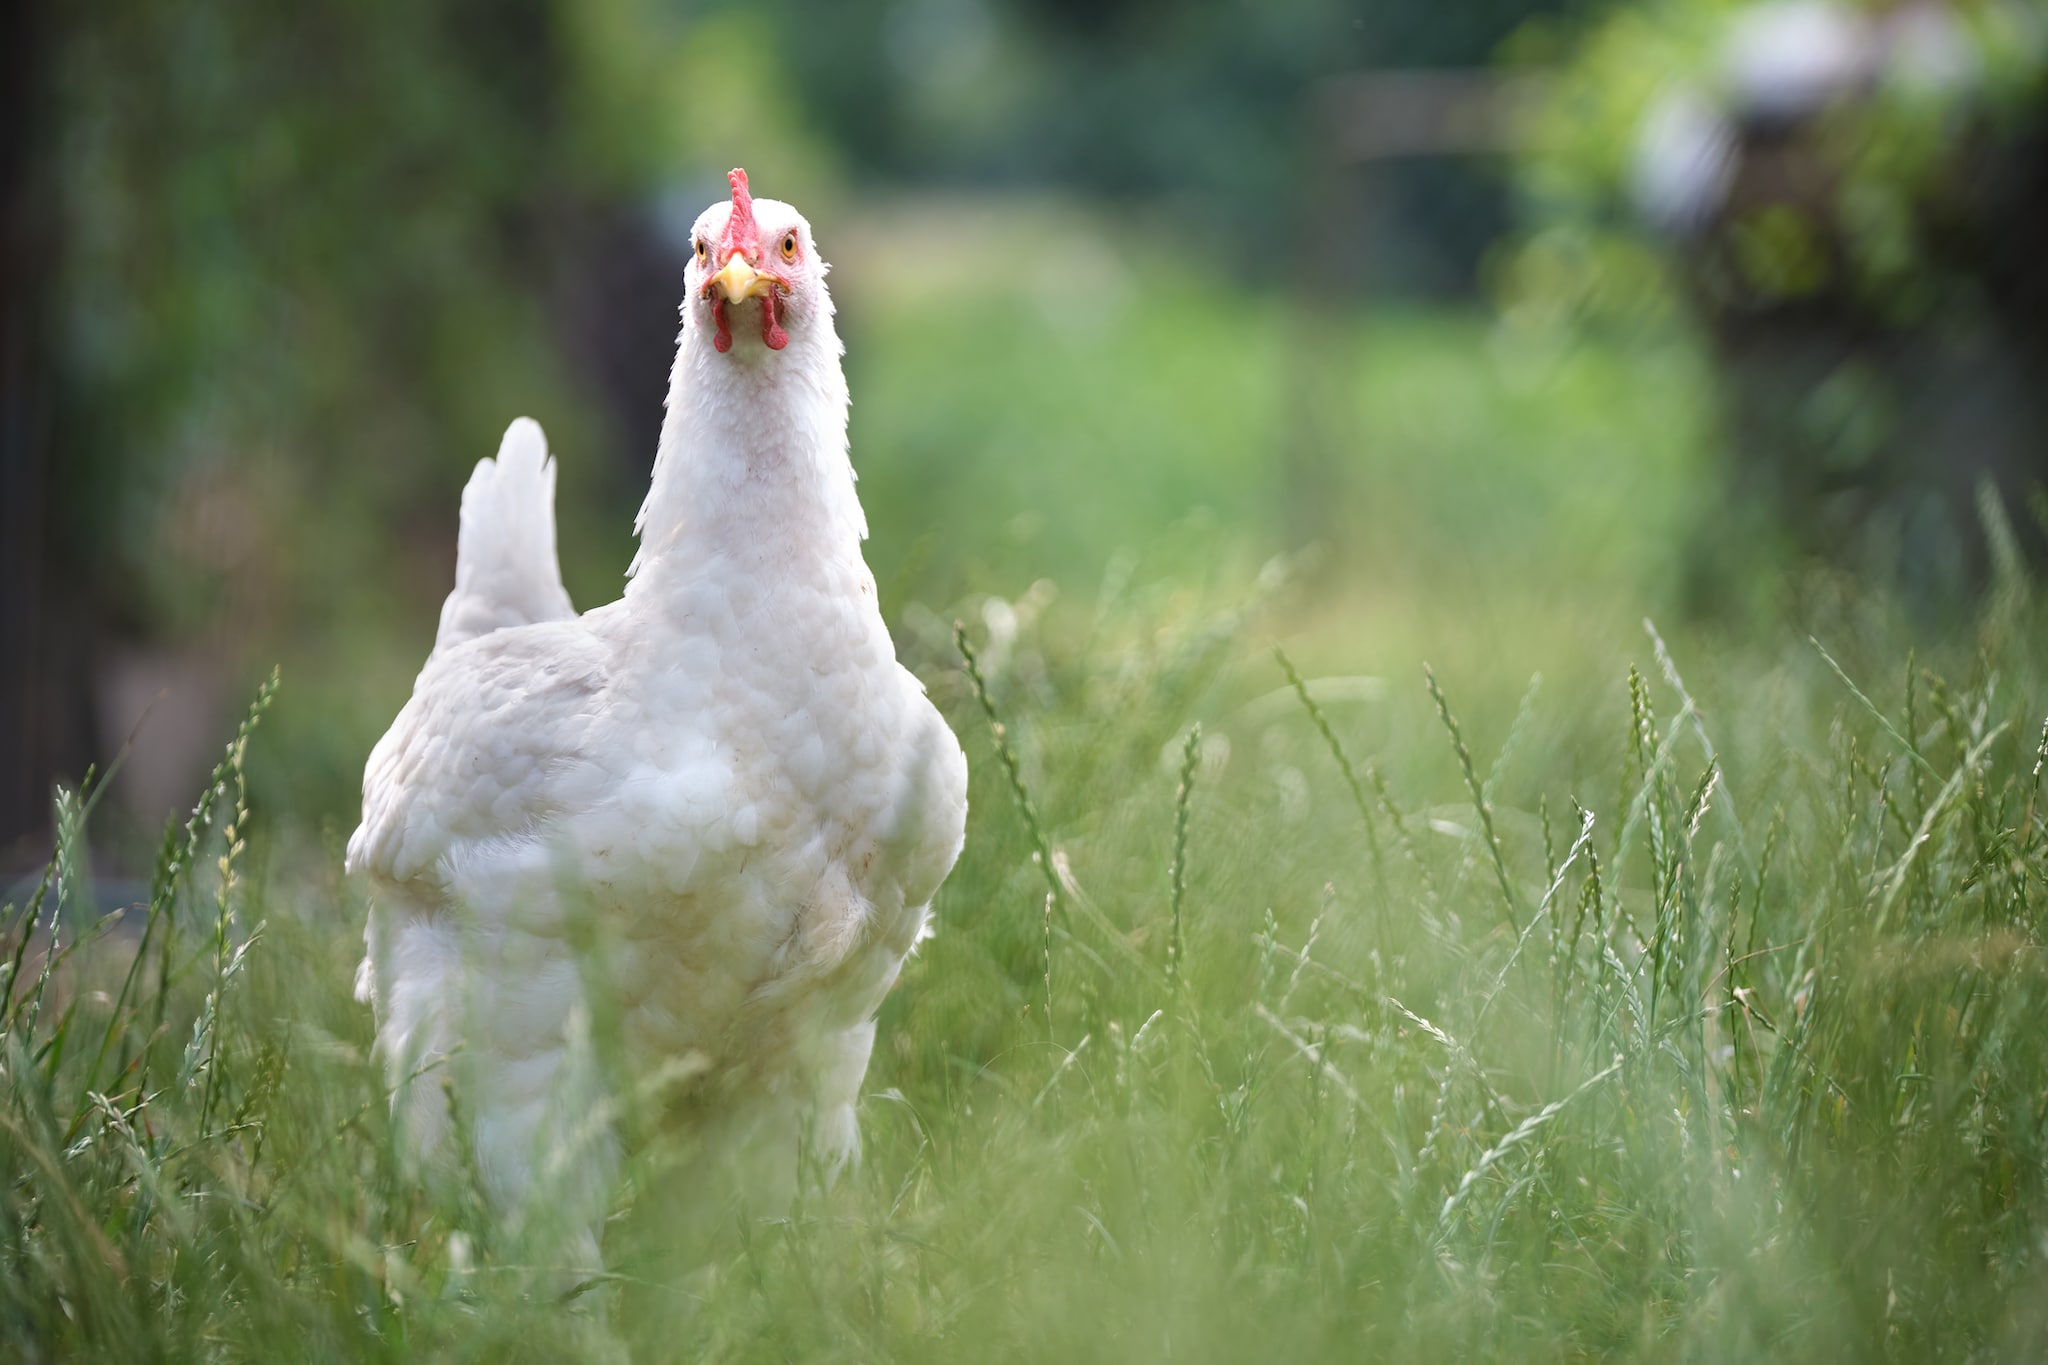 Domestic chicken standing on yard lawn with green grass